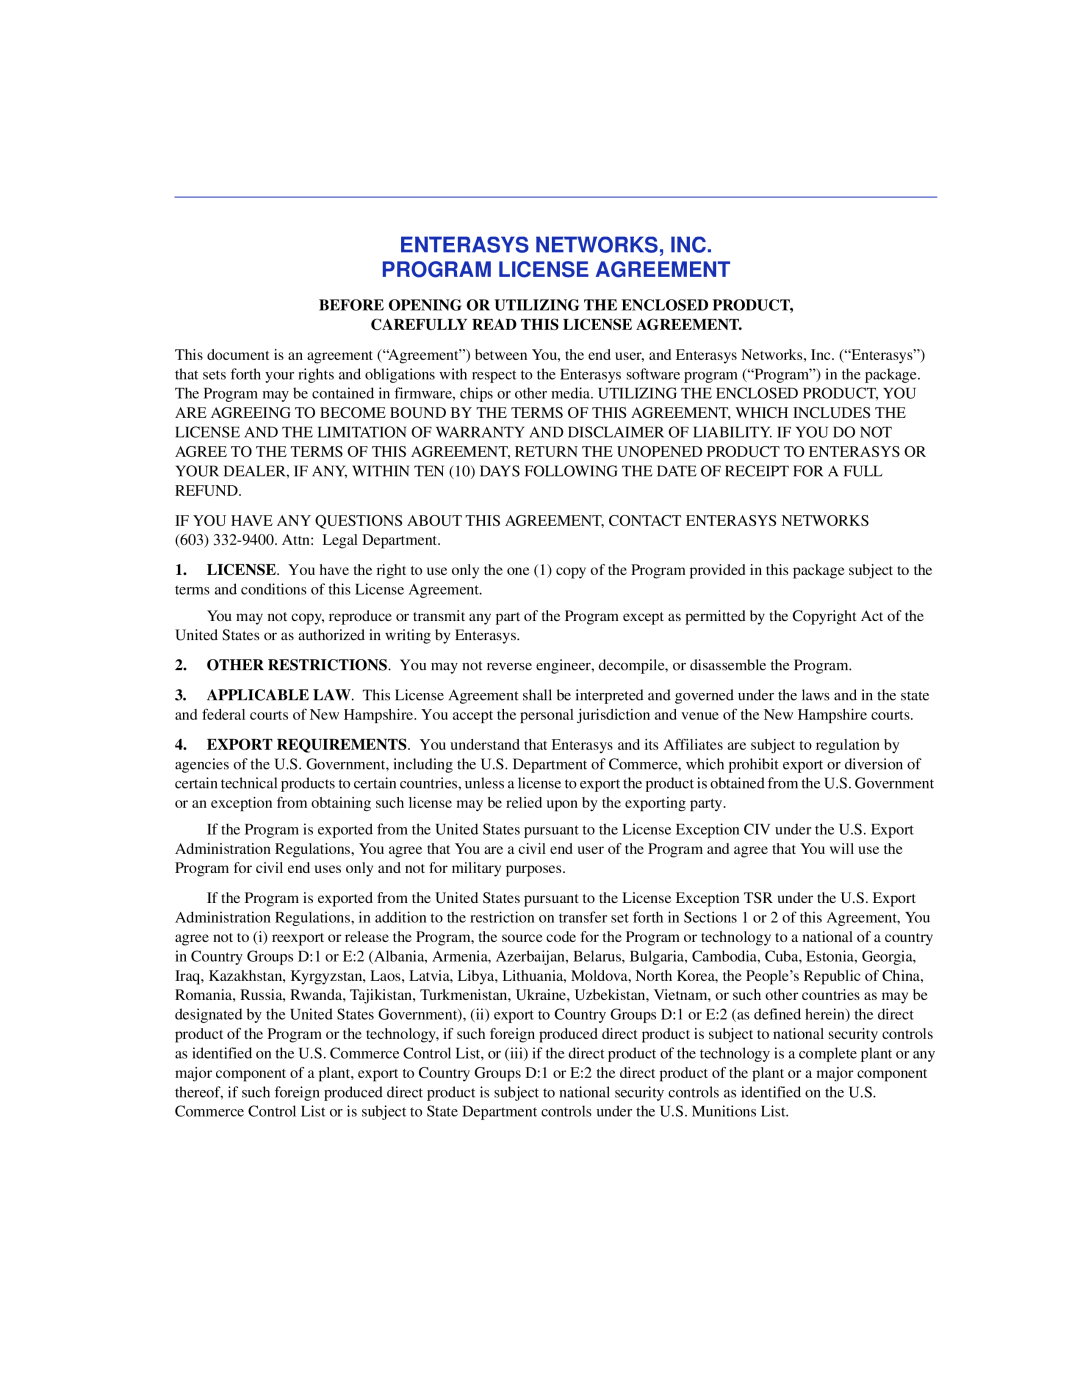 Enterasys Networks 6H352-25 manual Enterasys Networks, Inc Program License Agreement, Carefully Read This License Agreement 